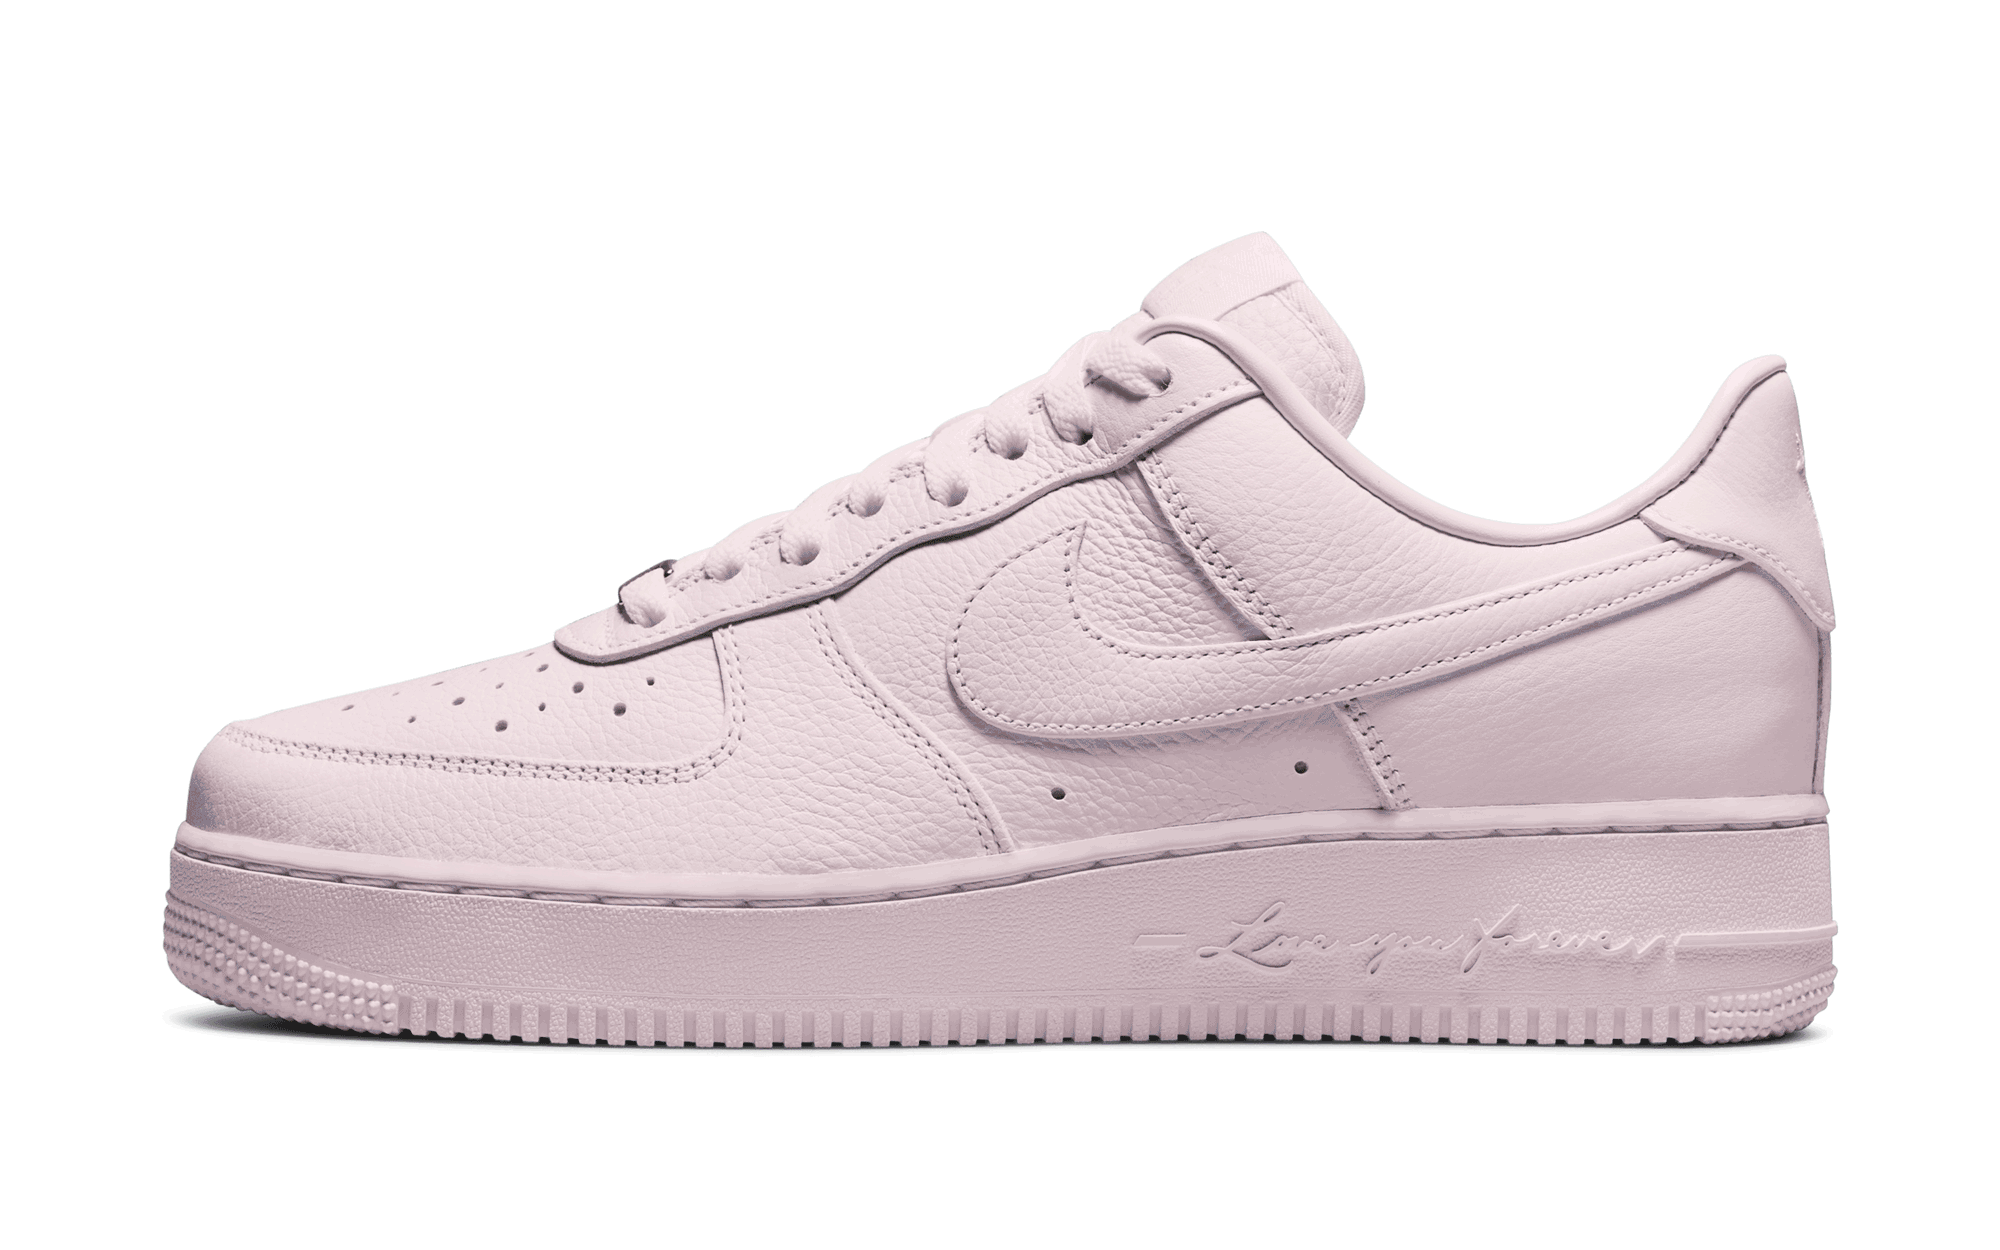 Drake Has More Nocta x Nike Air Force 1s in the Works